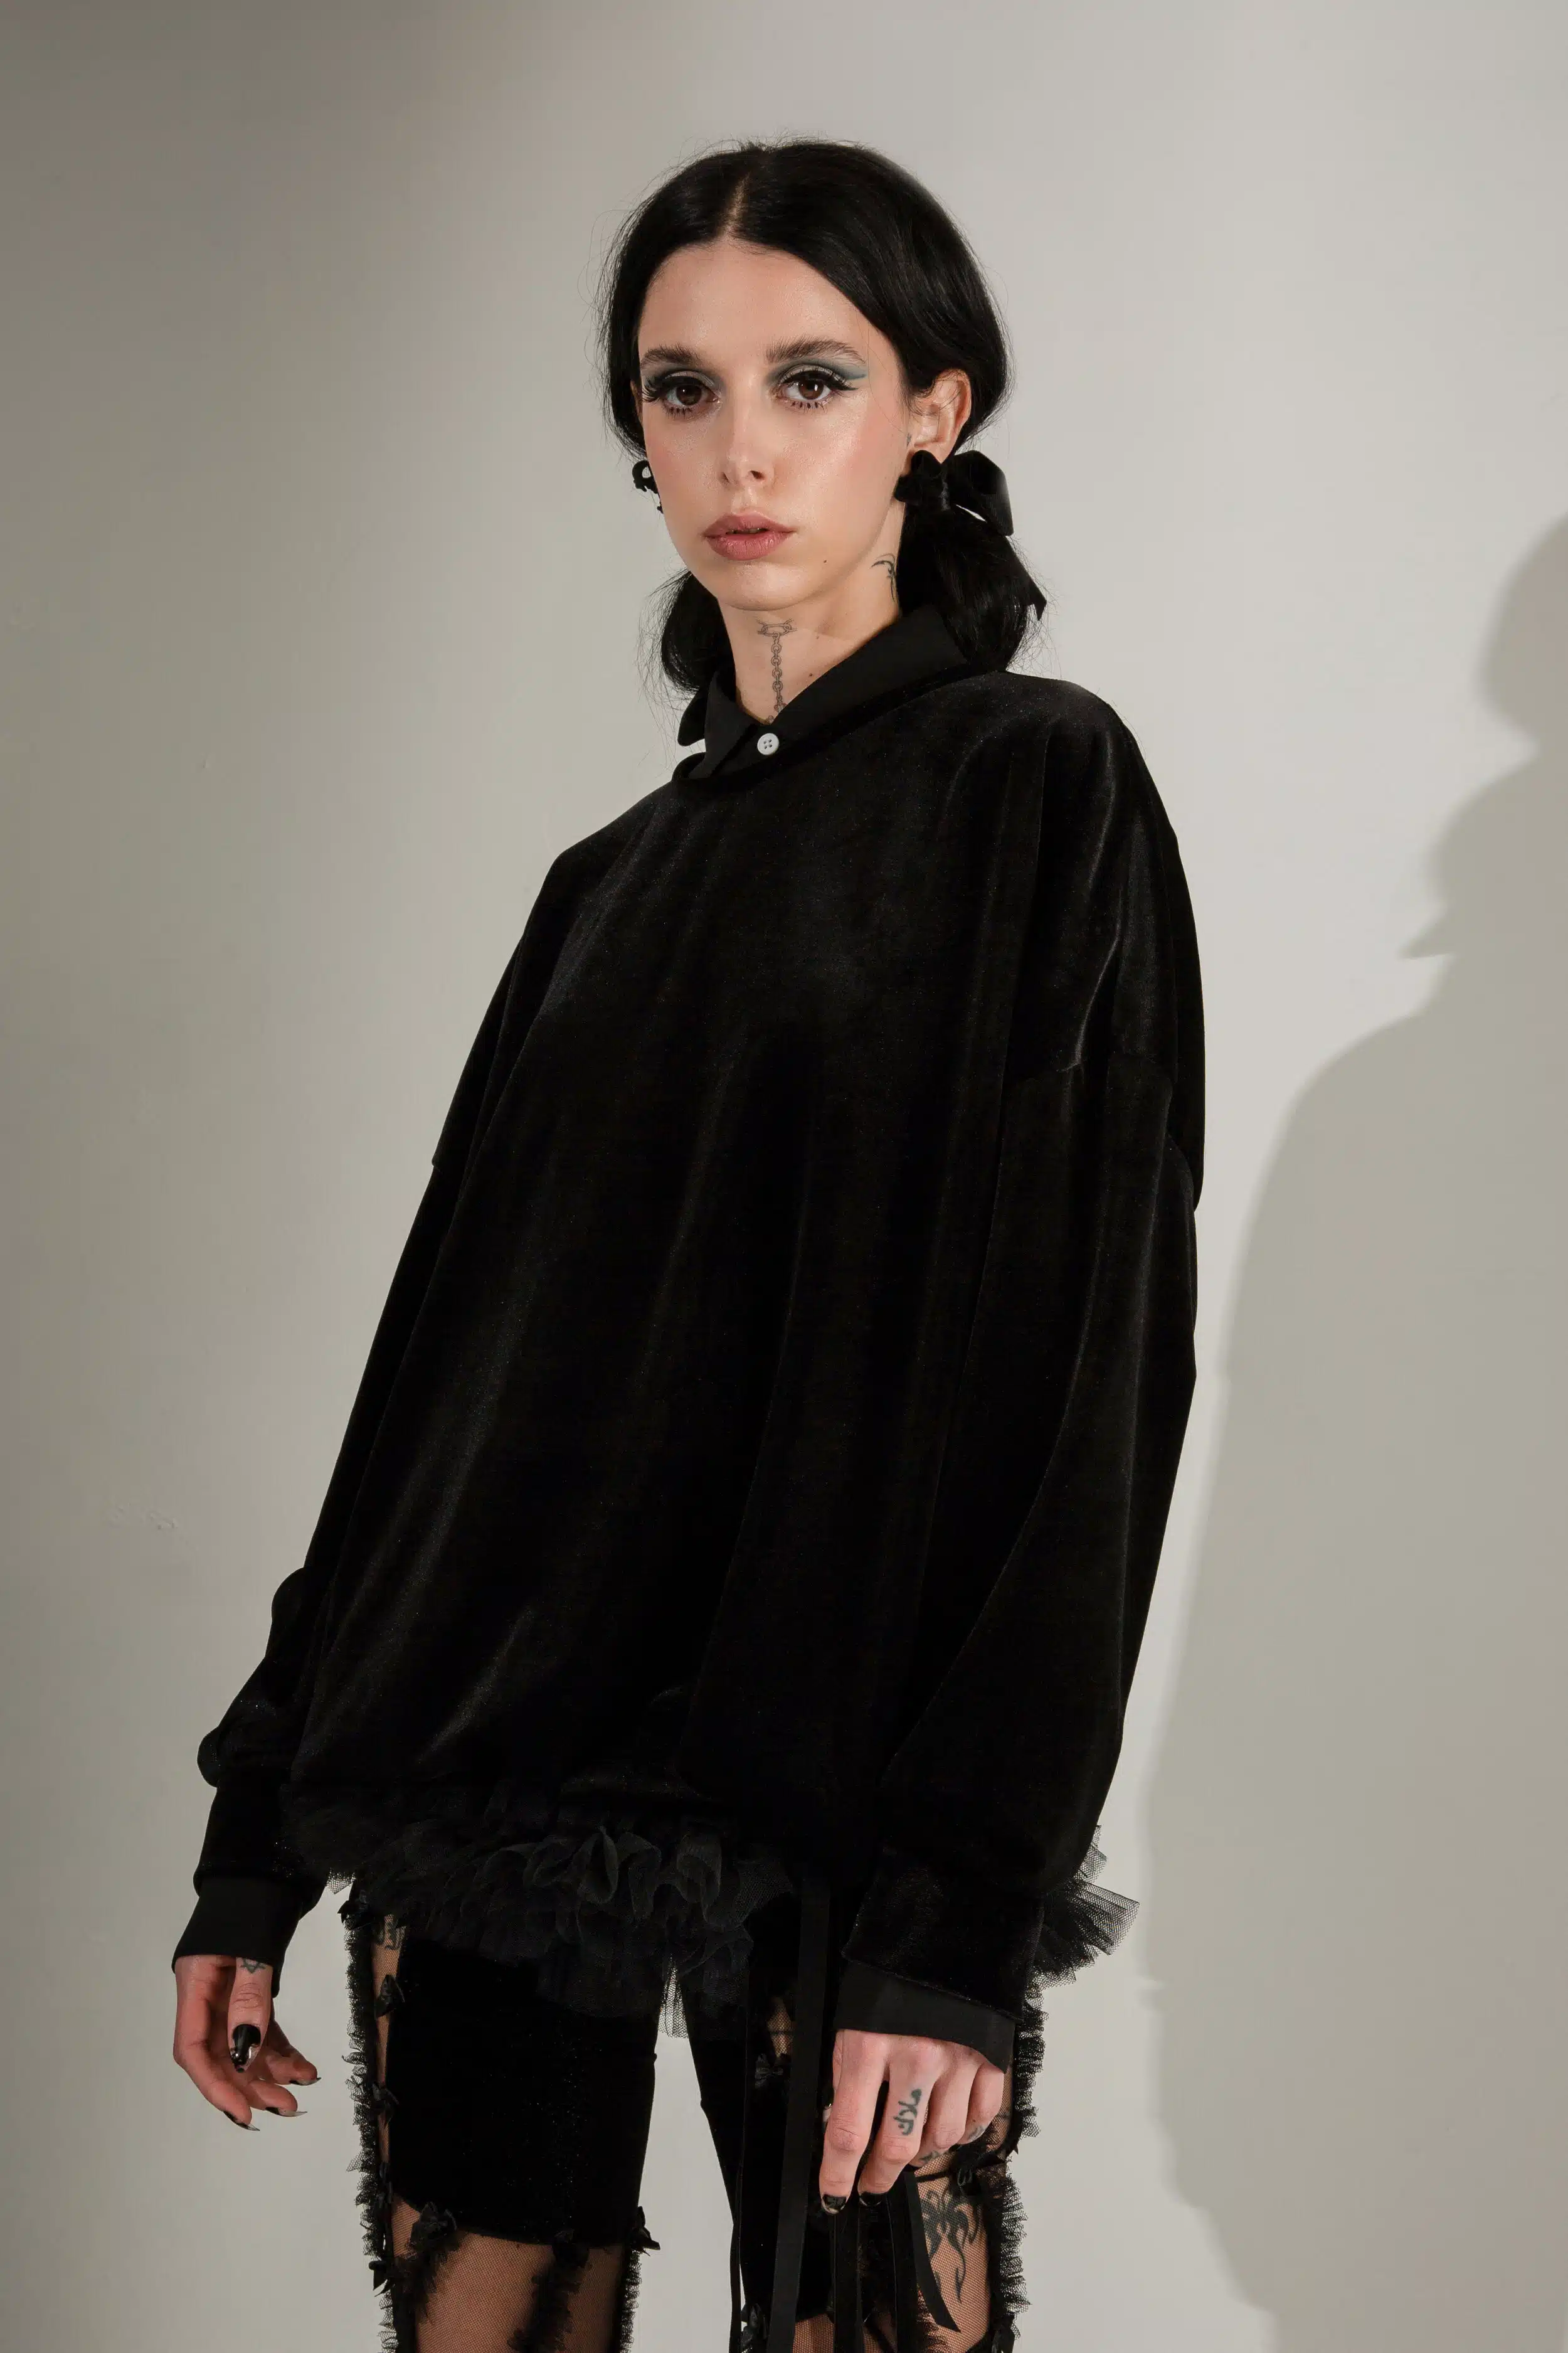 Image from FW21 Collection